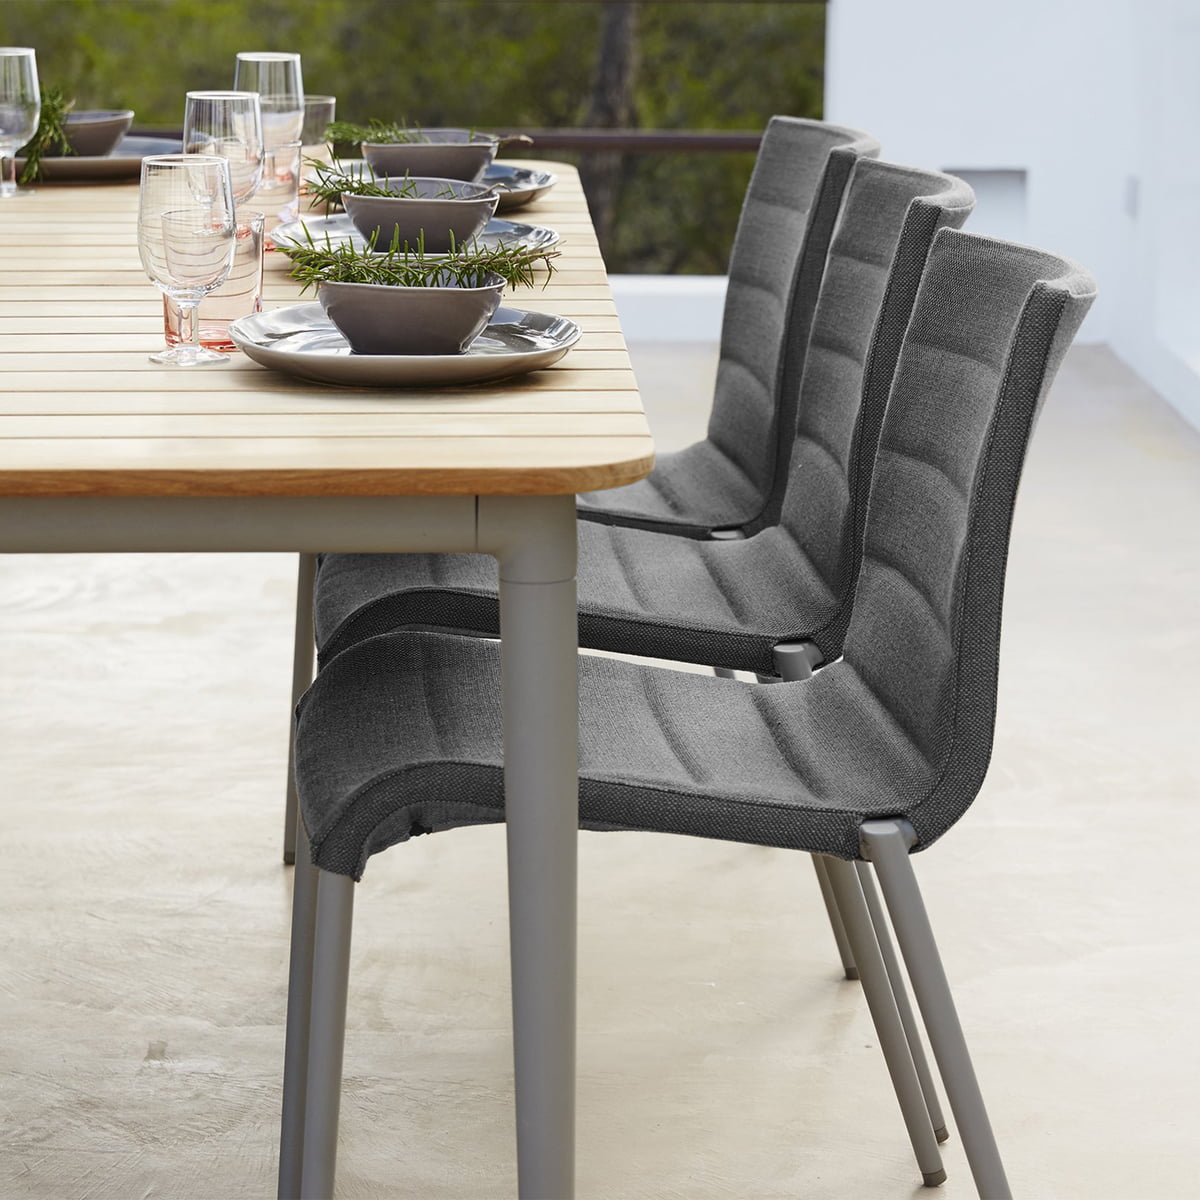 Cane-line Outdoor - chair Core | Connox